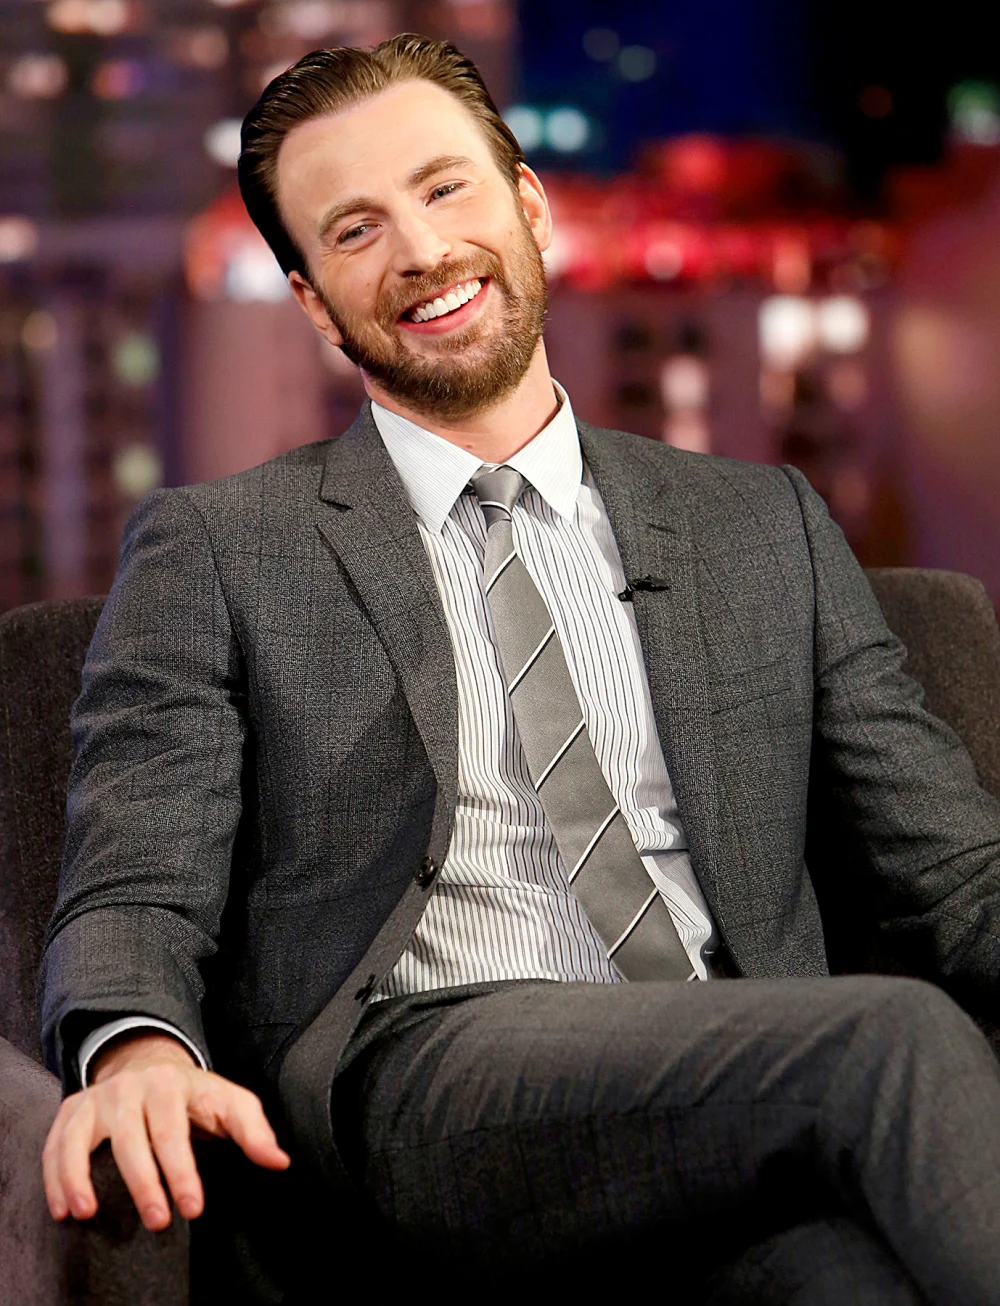 chris evans middle name